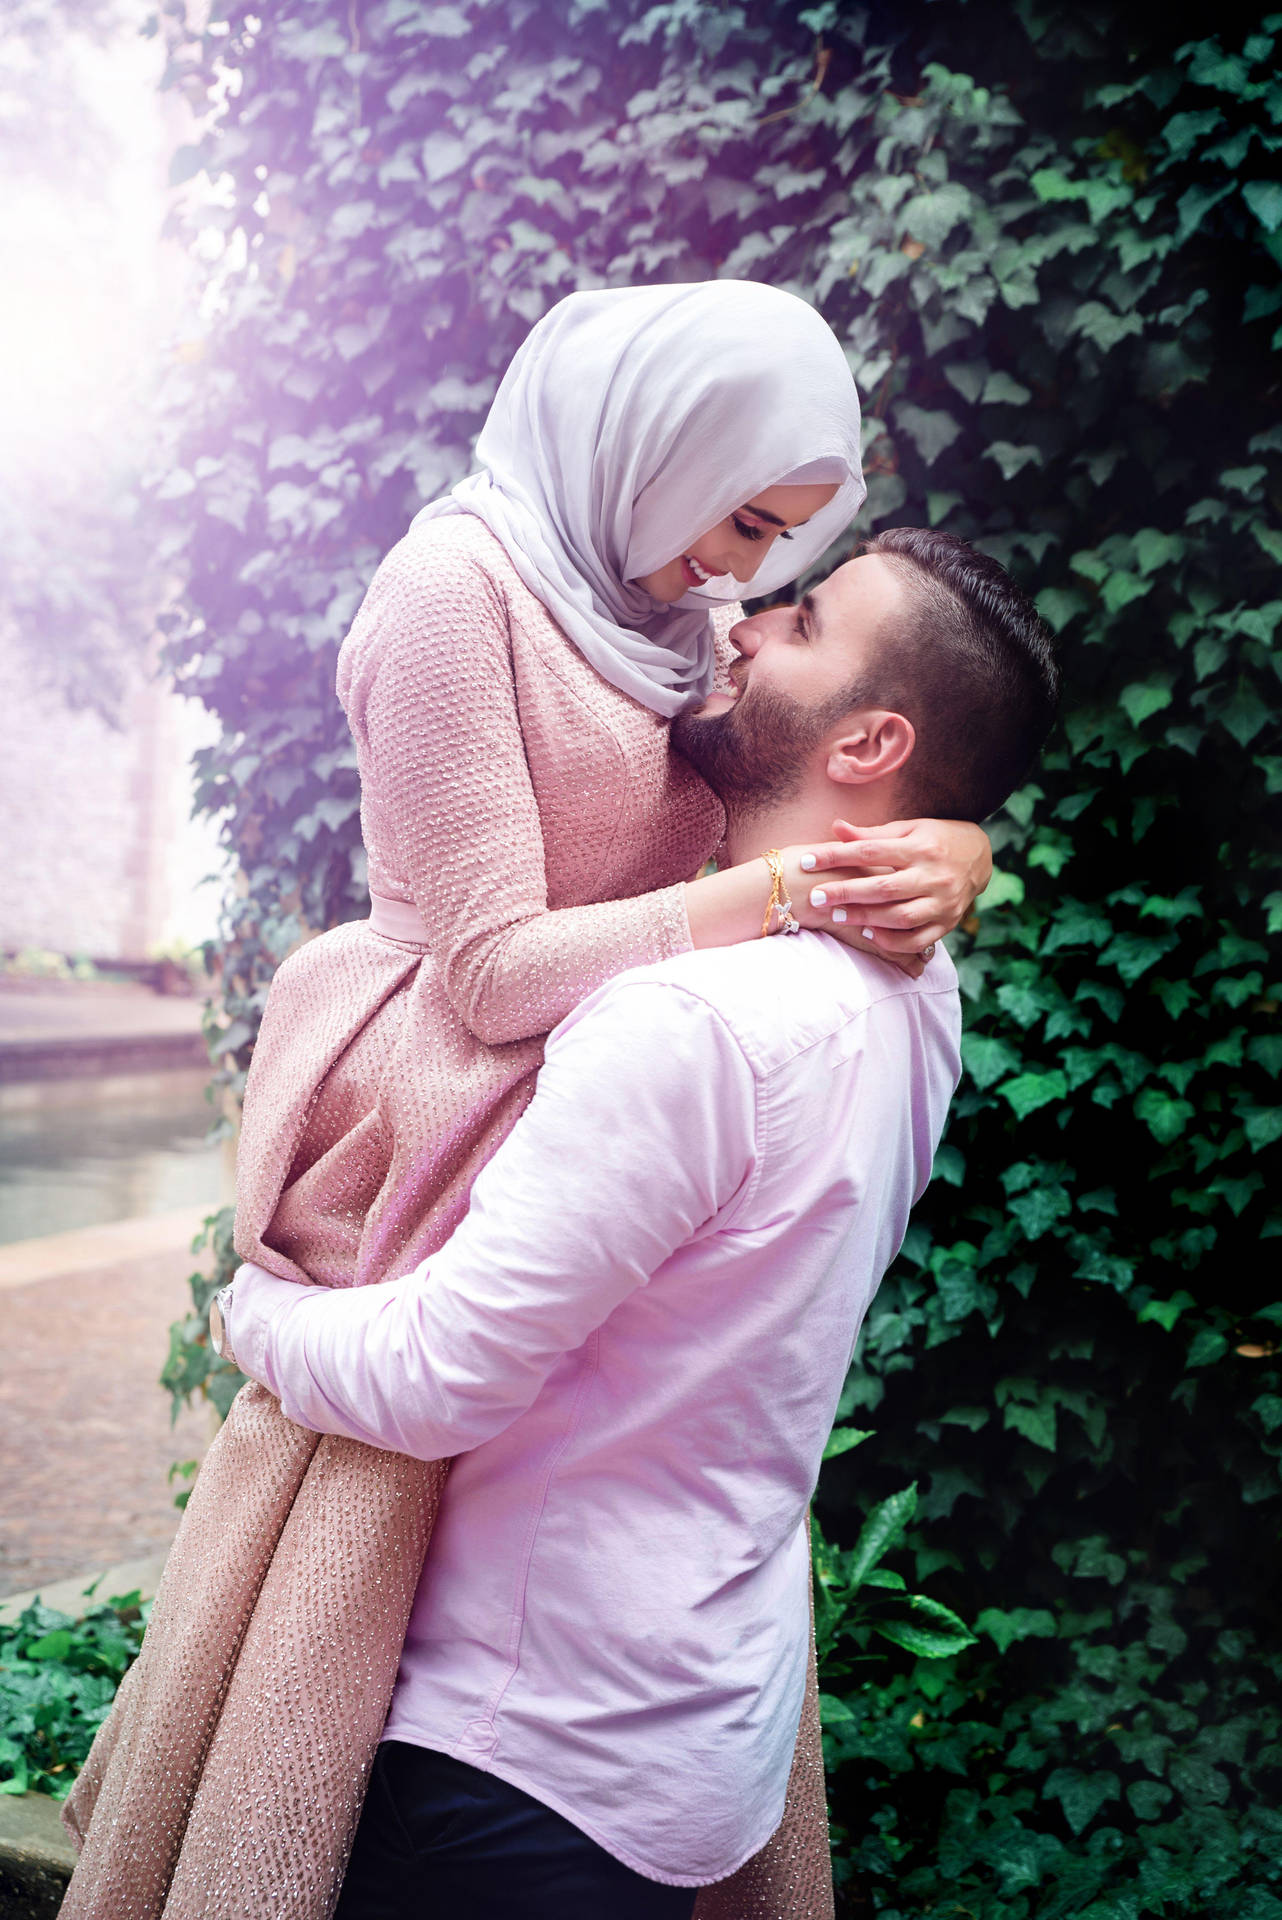 30+ Muslim Couple Wallpapers Download For Free [HQ]